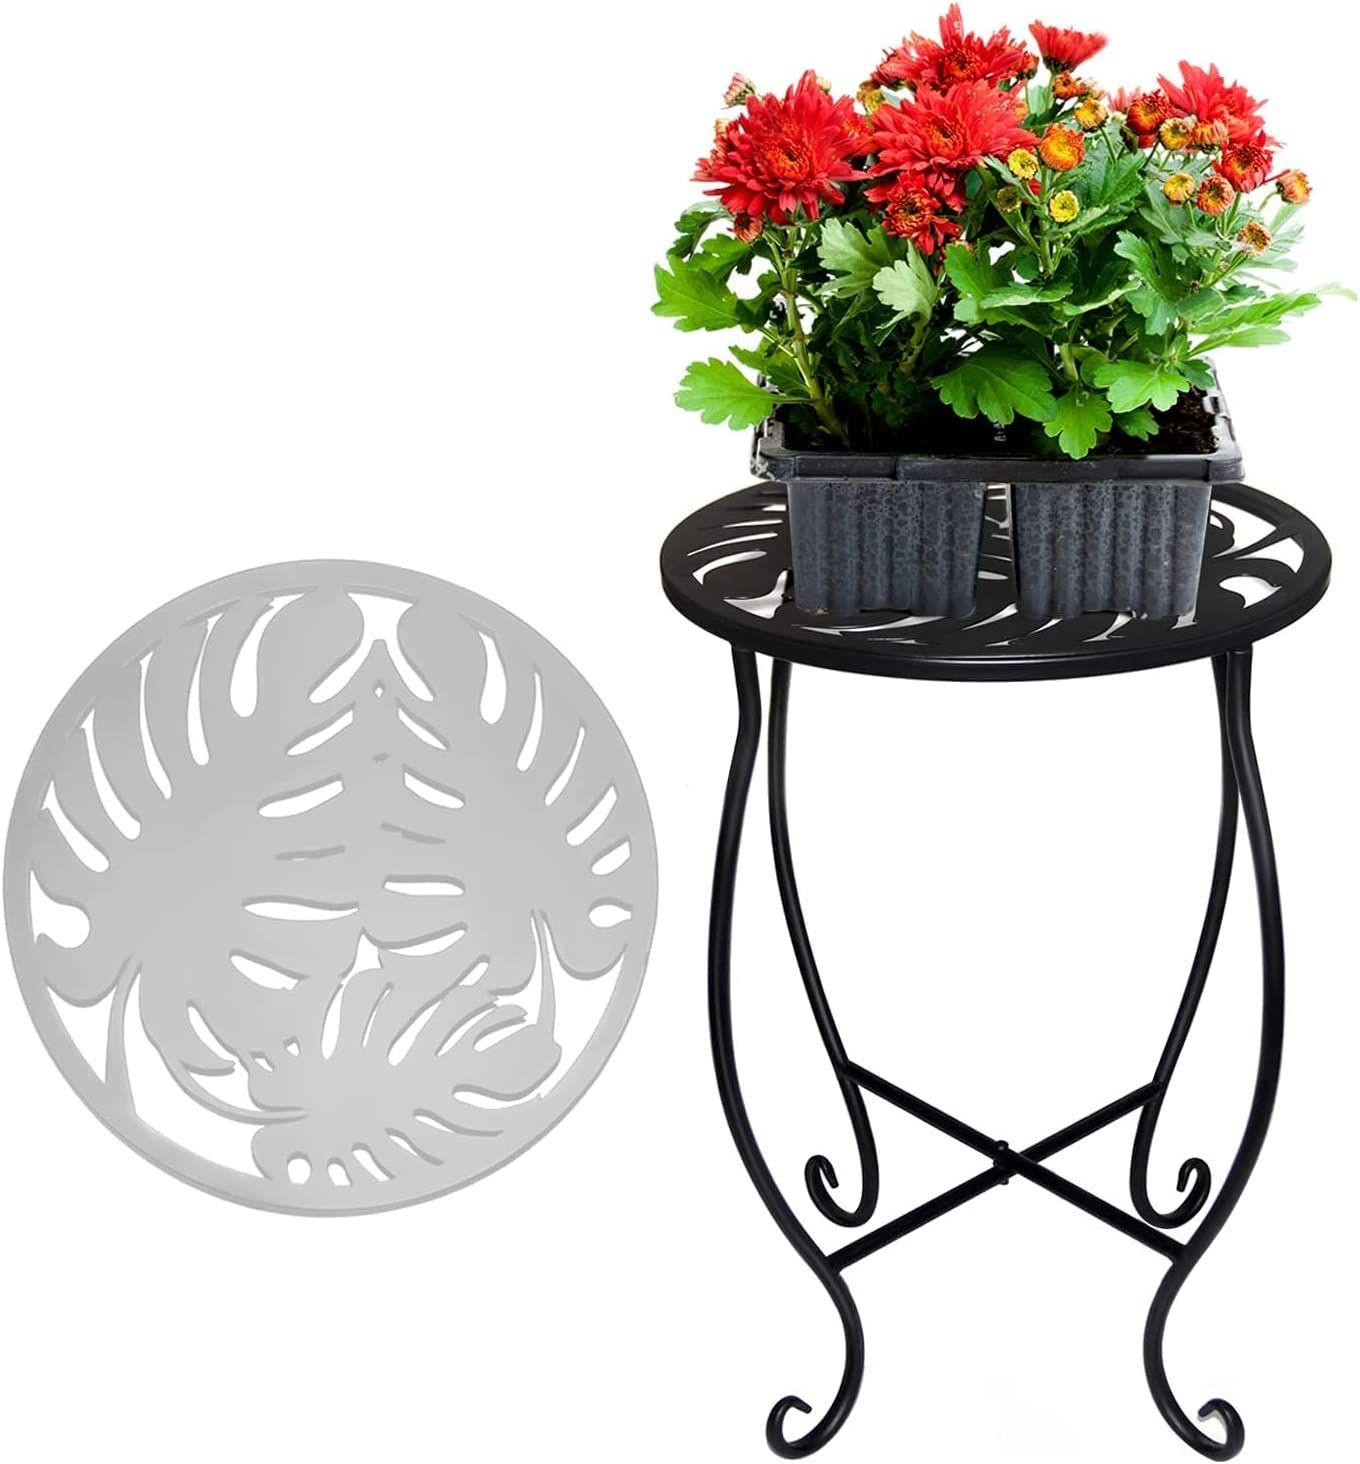 15 Inch Plant Stands Intended For 2020 15'' Tall Plant Stand For Flower Pot, 10 Inch Round Metal Plant  Stand Indoor, De (View 13 of 15)